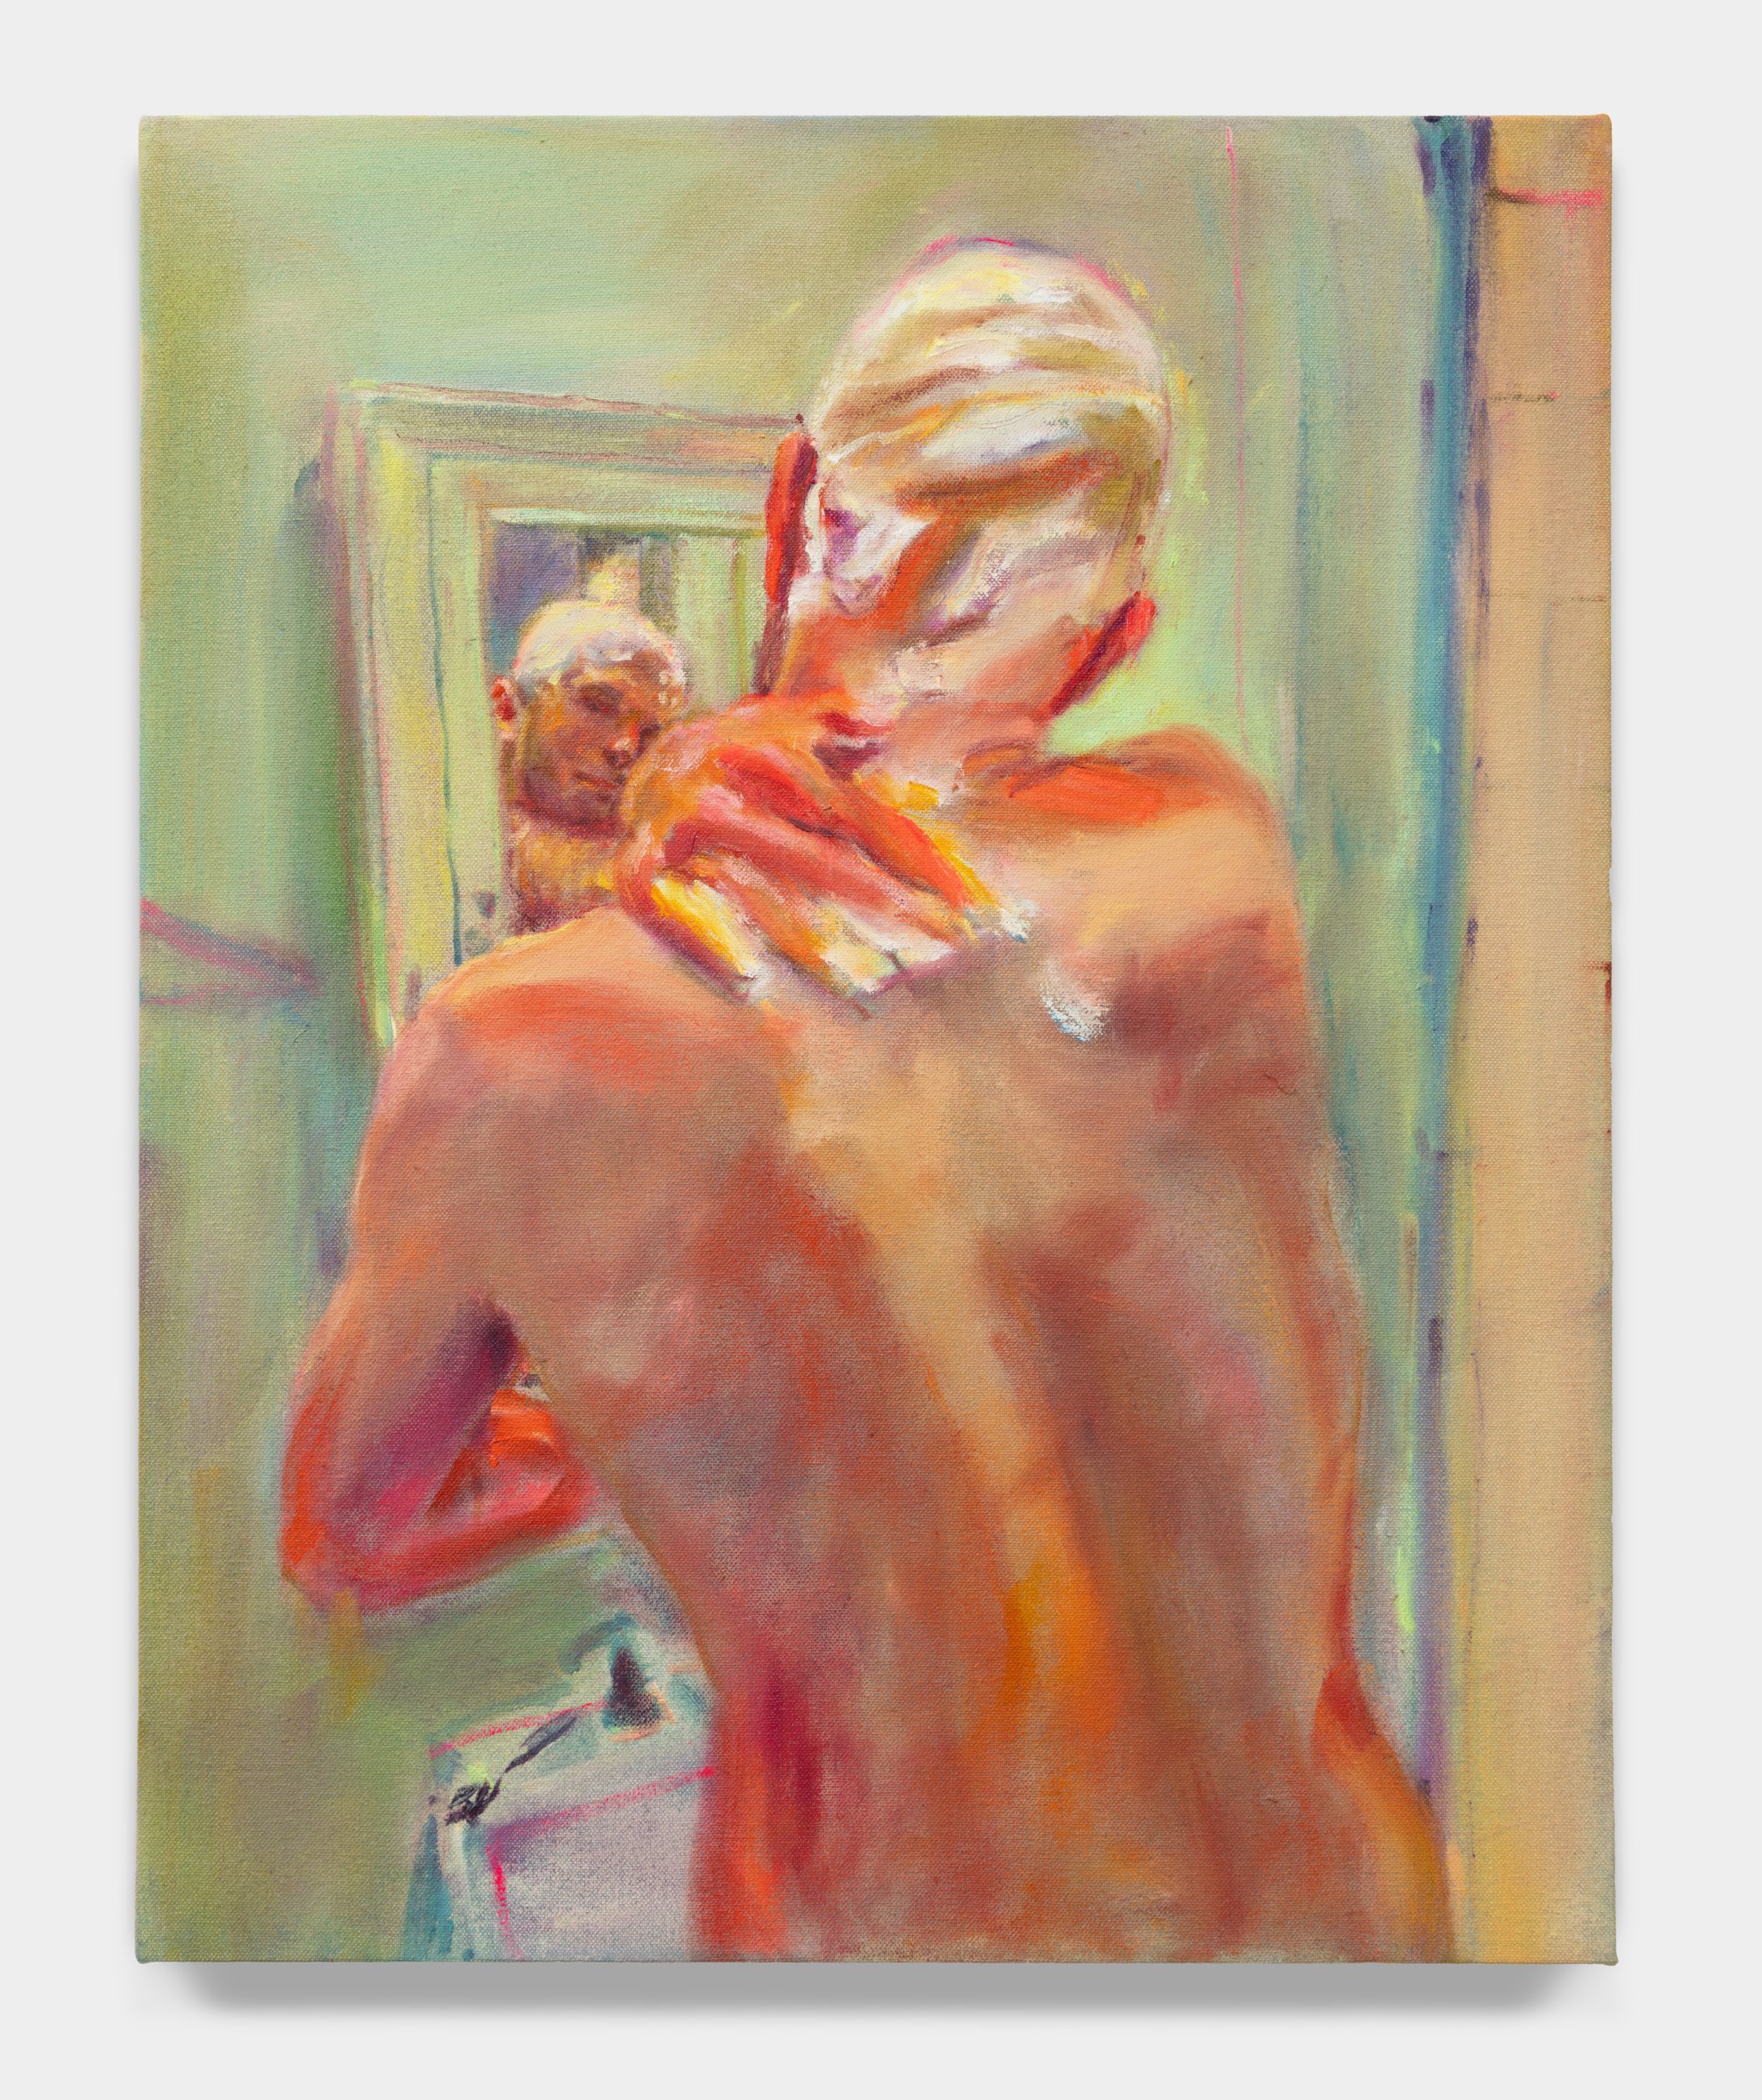  Shaving, 2023  Oil on canvas  20 x 16 inches 